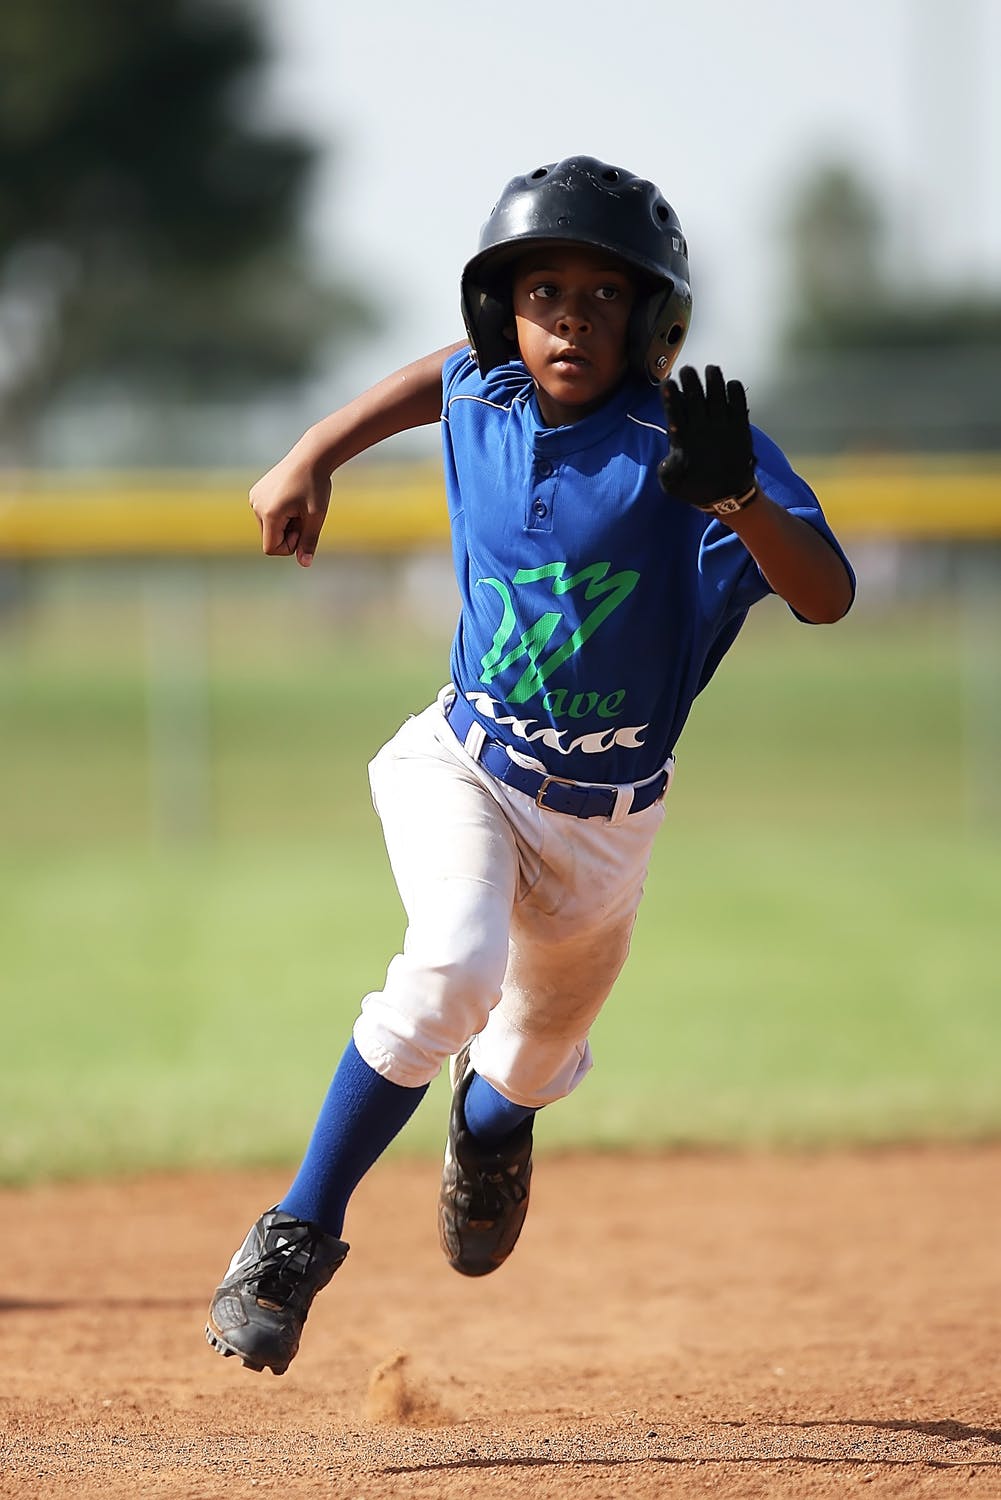 Young baseball player running the bases after a hit